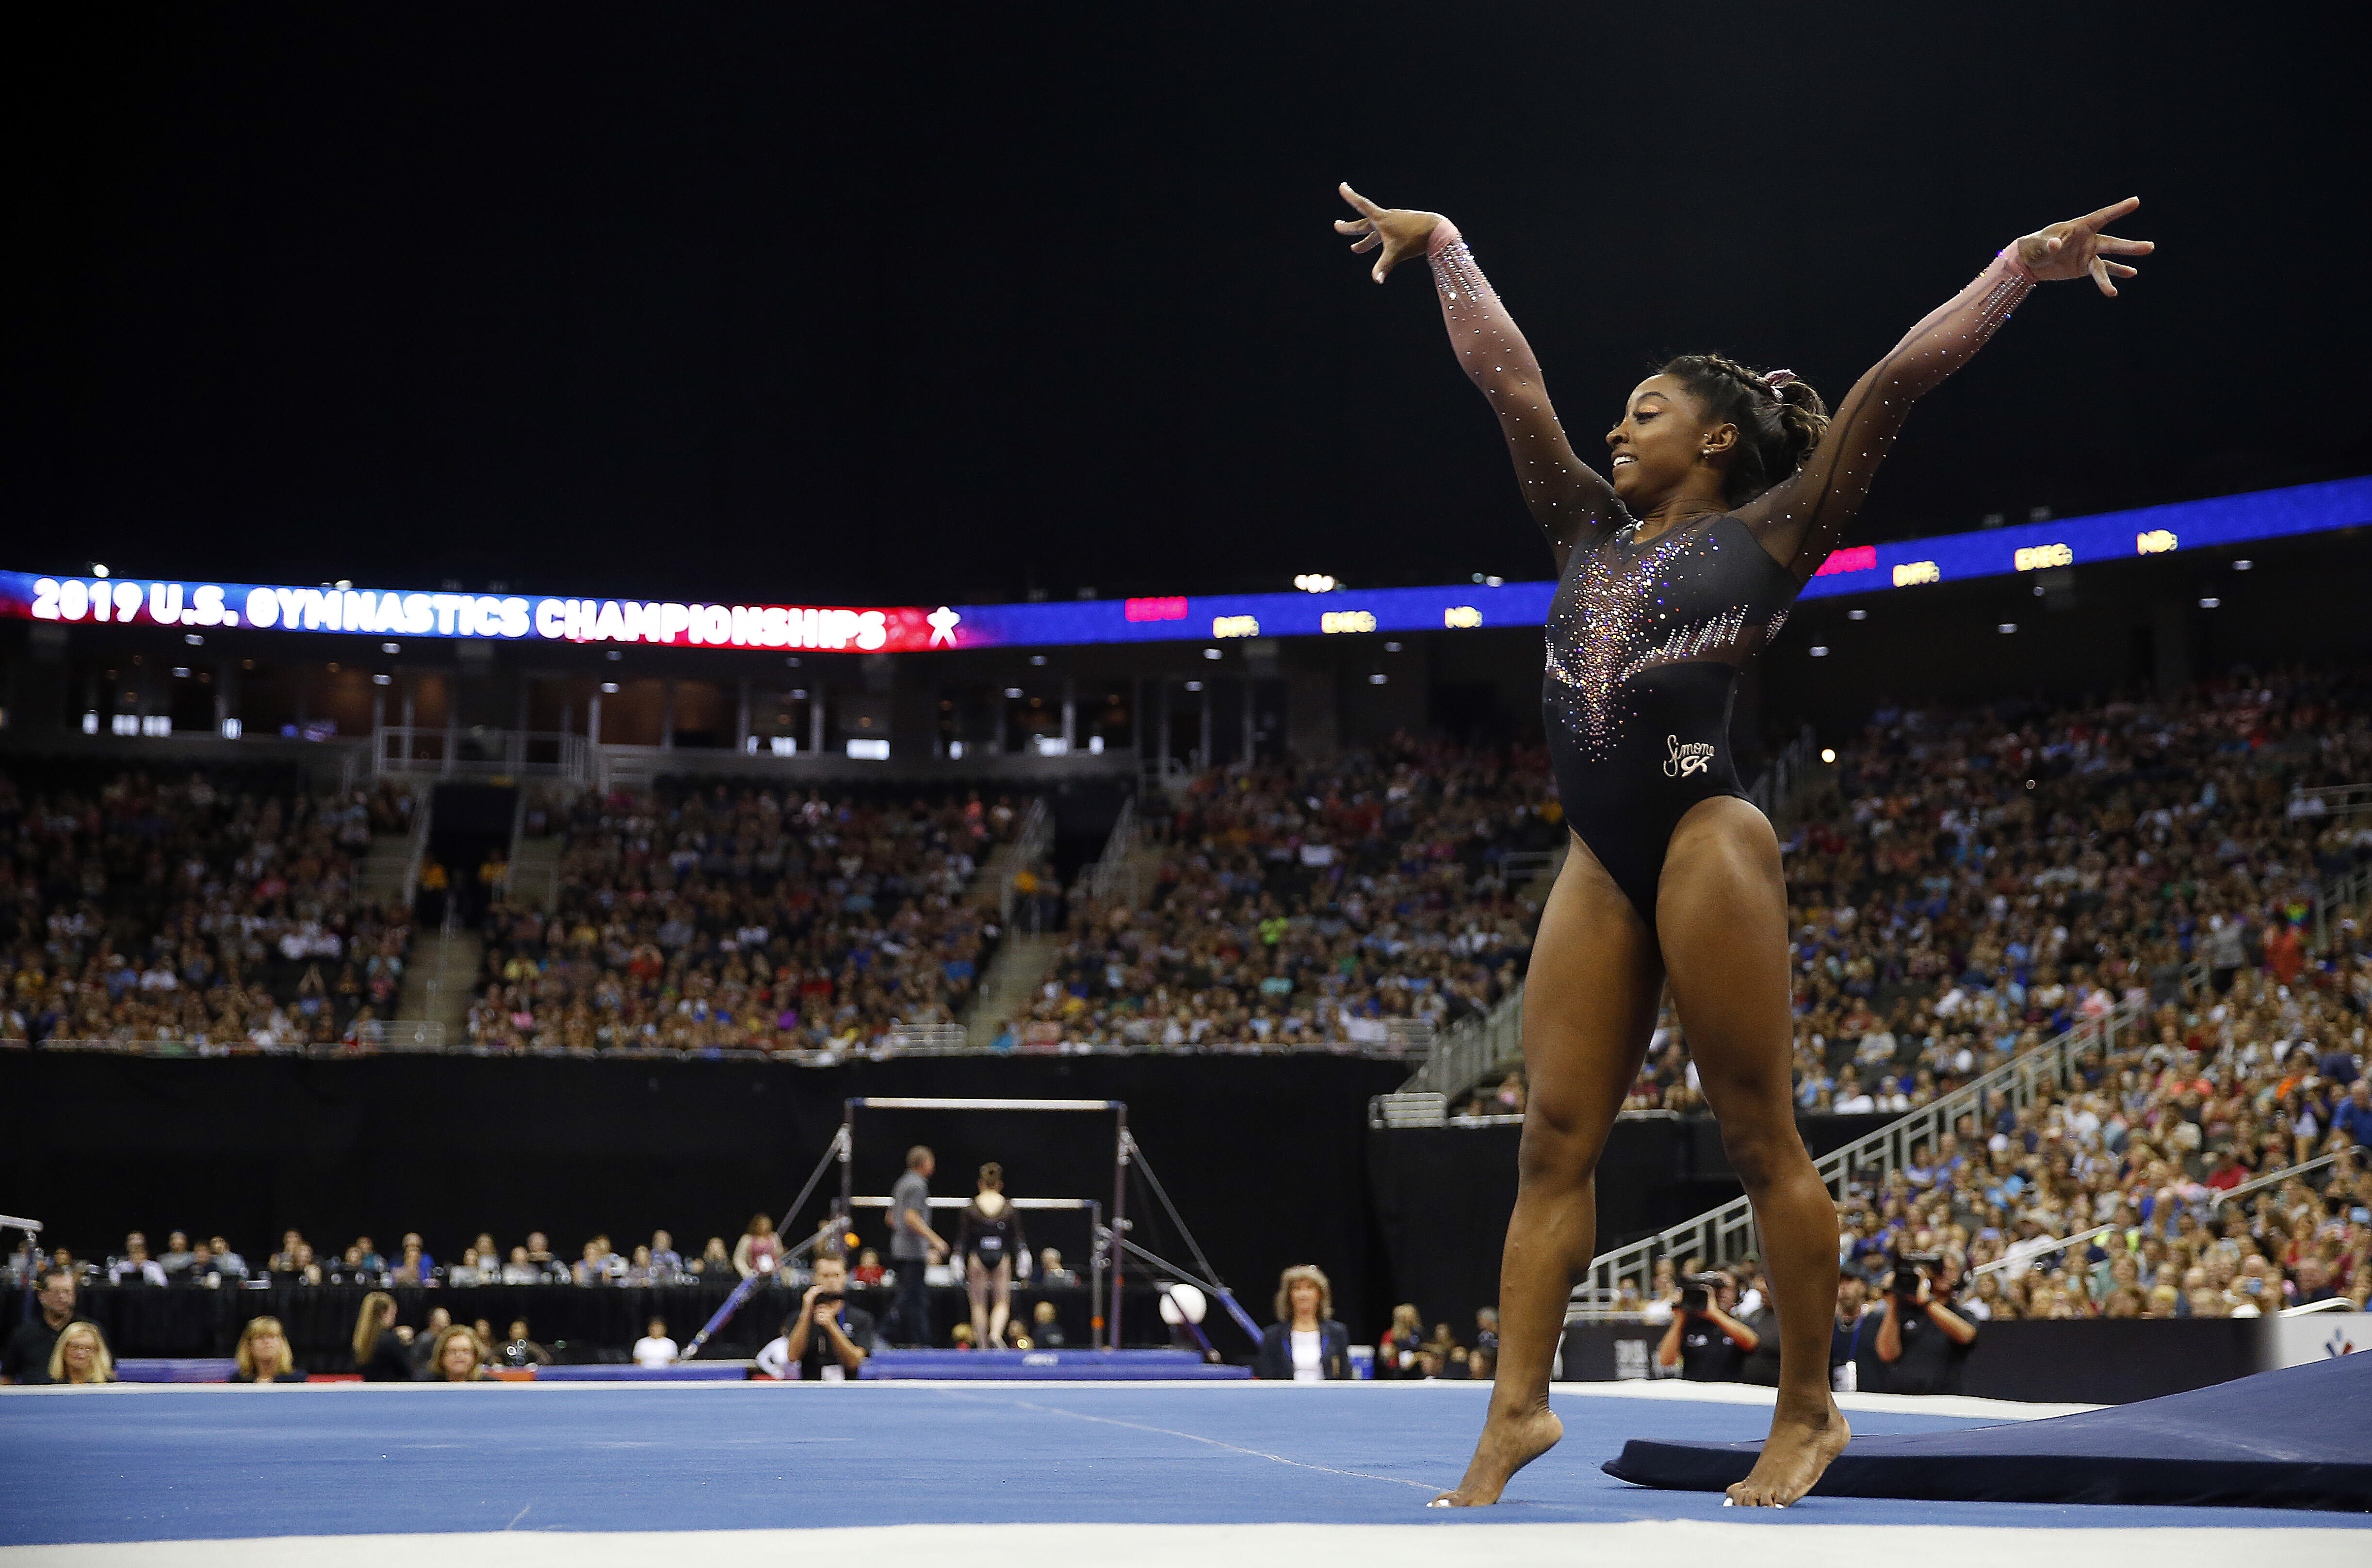 Watch Simone Biles Make History With New Triple Double In Her Floor